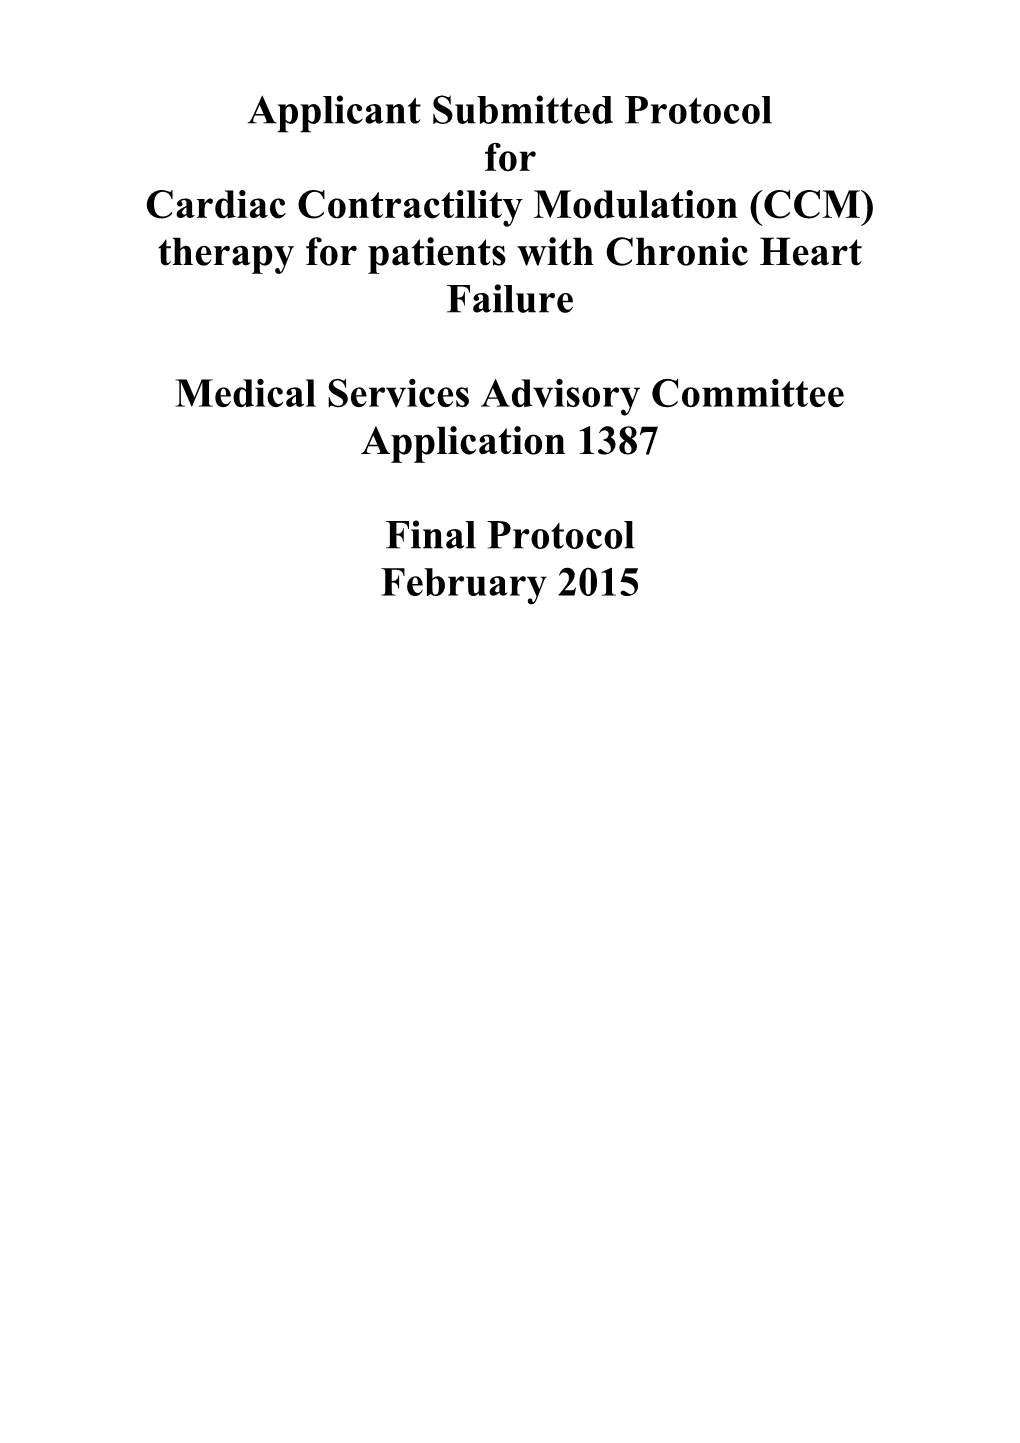 Cardiac Contractility Modulation (CCM) Therapy for Patients with Chronic Heart Failure